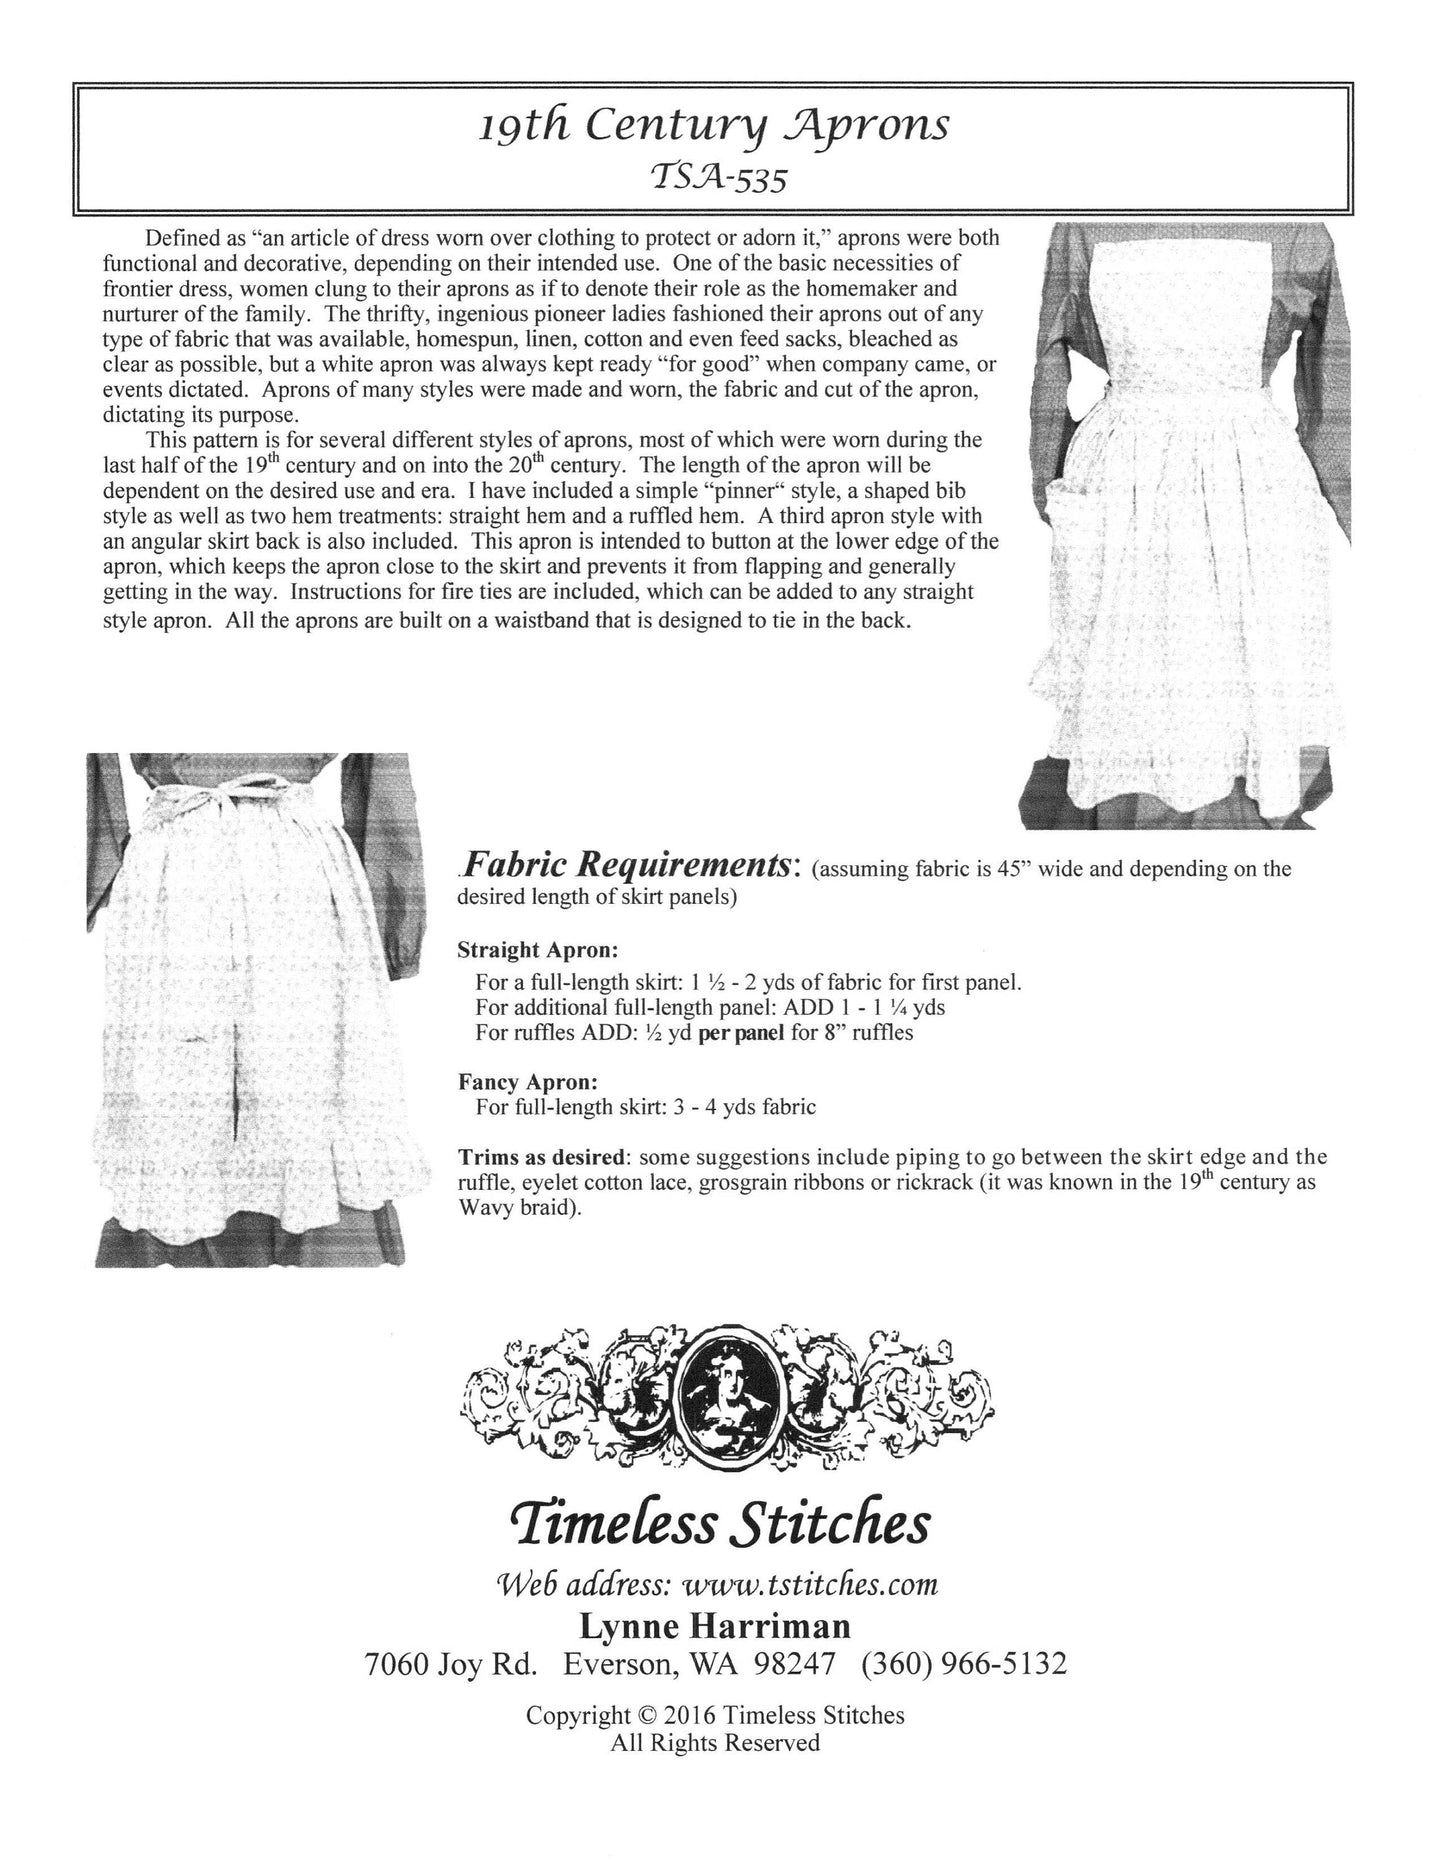 19th Century Aprons/ Timeless Stitches Sewing Pattern TSA-535 19th Century Aprons DIGITAL DOWNLOAD